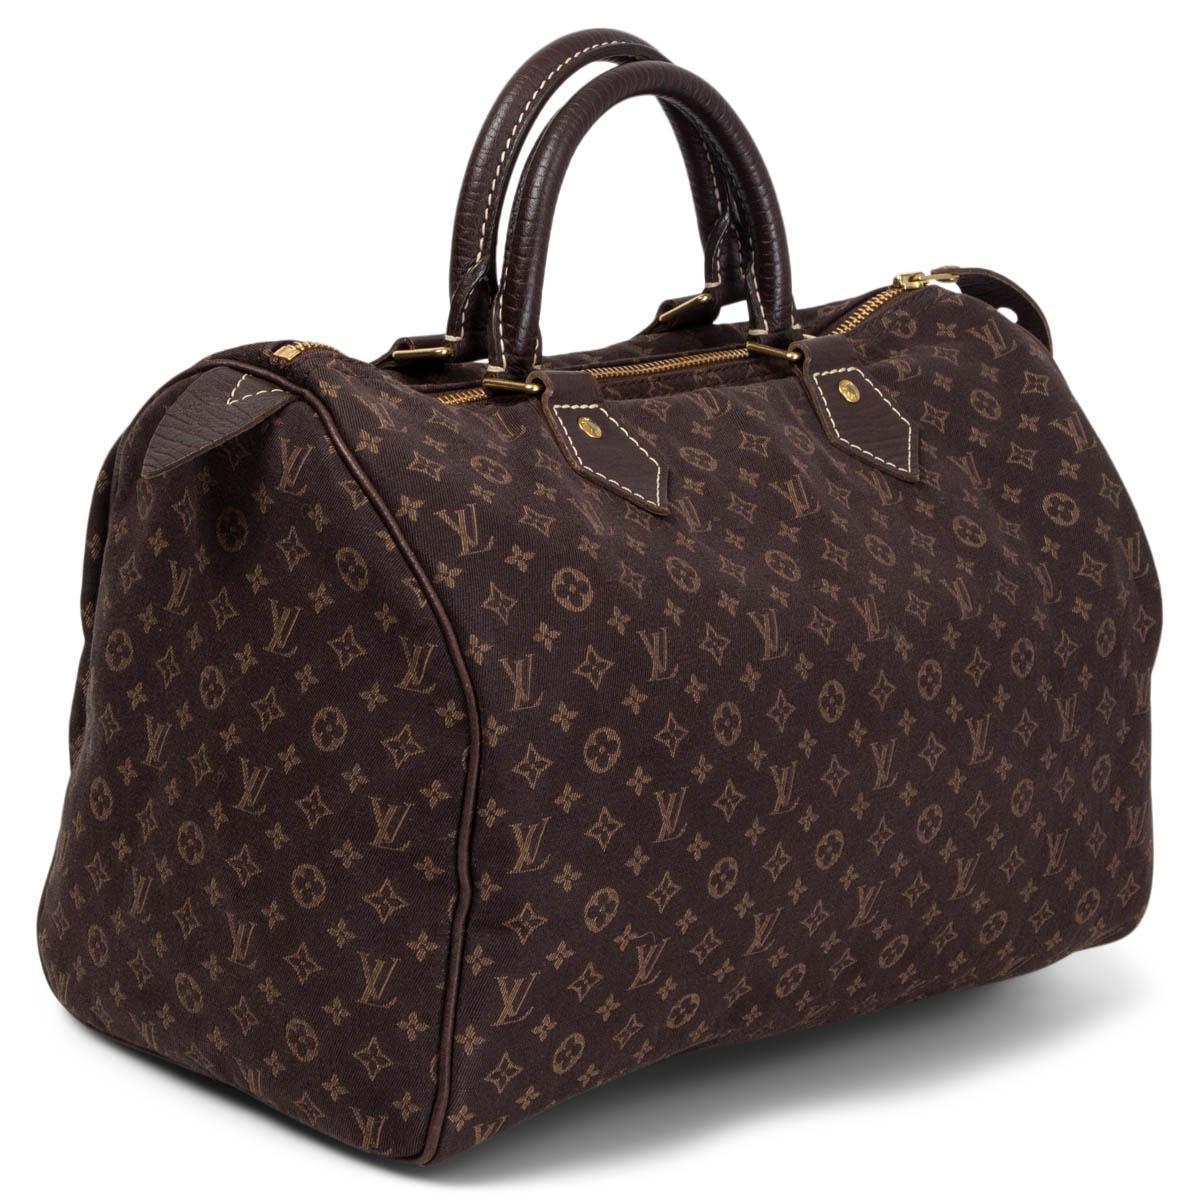 100% authentic Louis Vuitton Fusain Monogram Mini Lin Idylle Speedy 30 in brown 58% cotton, 24% linen and 18% polyamide with leather trim. Lined in brown canvas with one open pocket against the back. Has been carried and is in excellent condition.